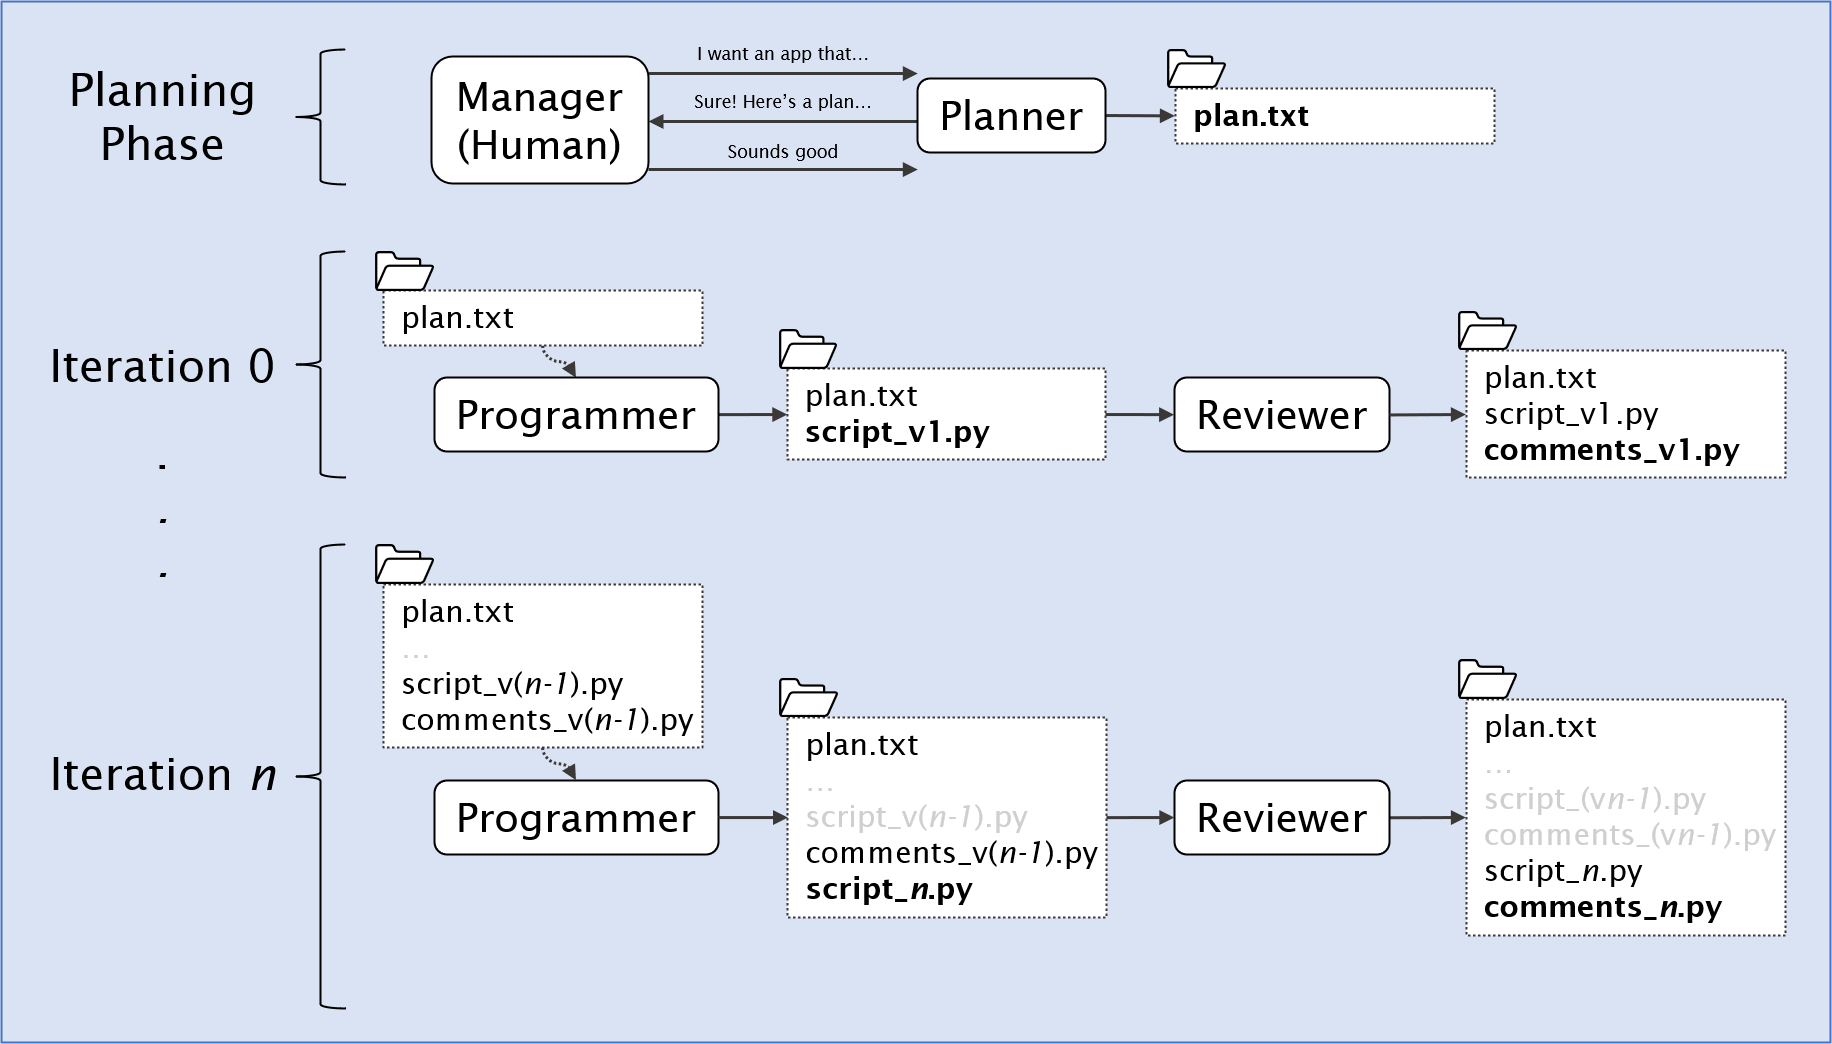 Diagram depicting the program phases, including the interactions between user/agents, creation of files, and presentation of files to agents.